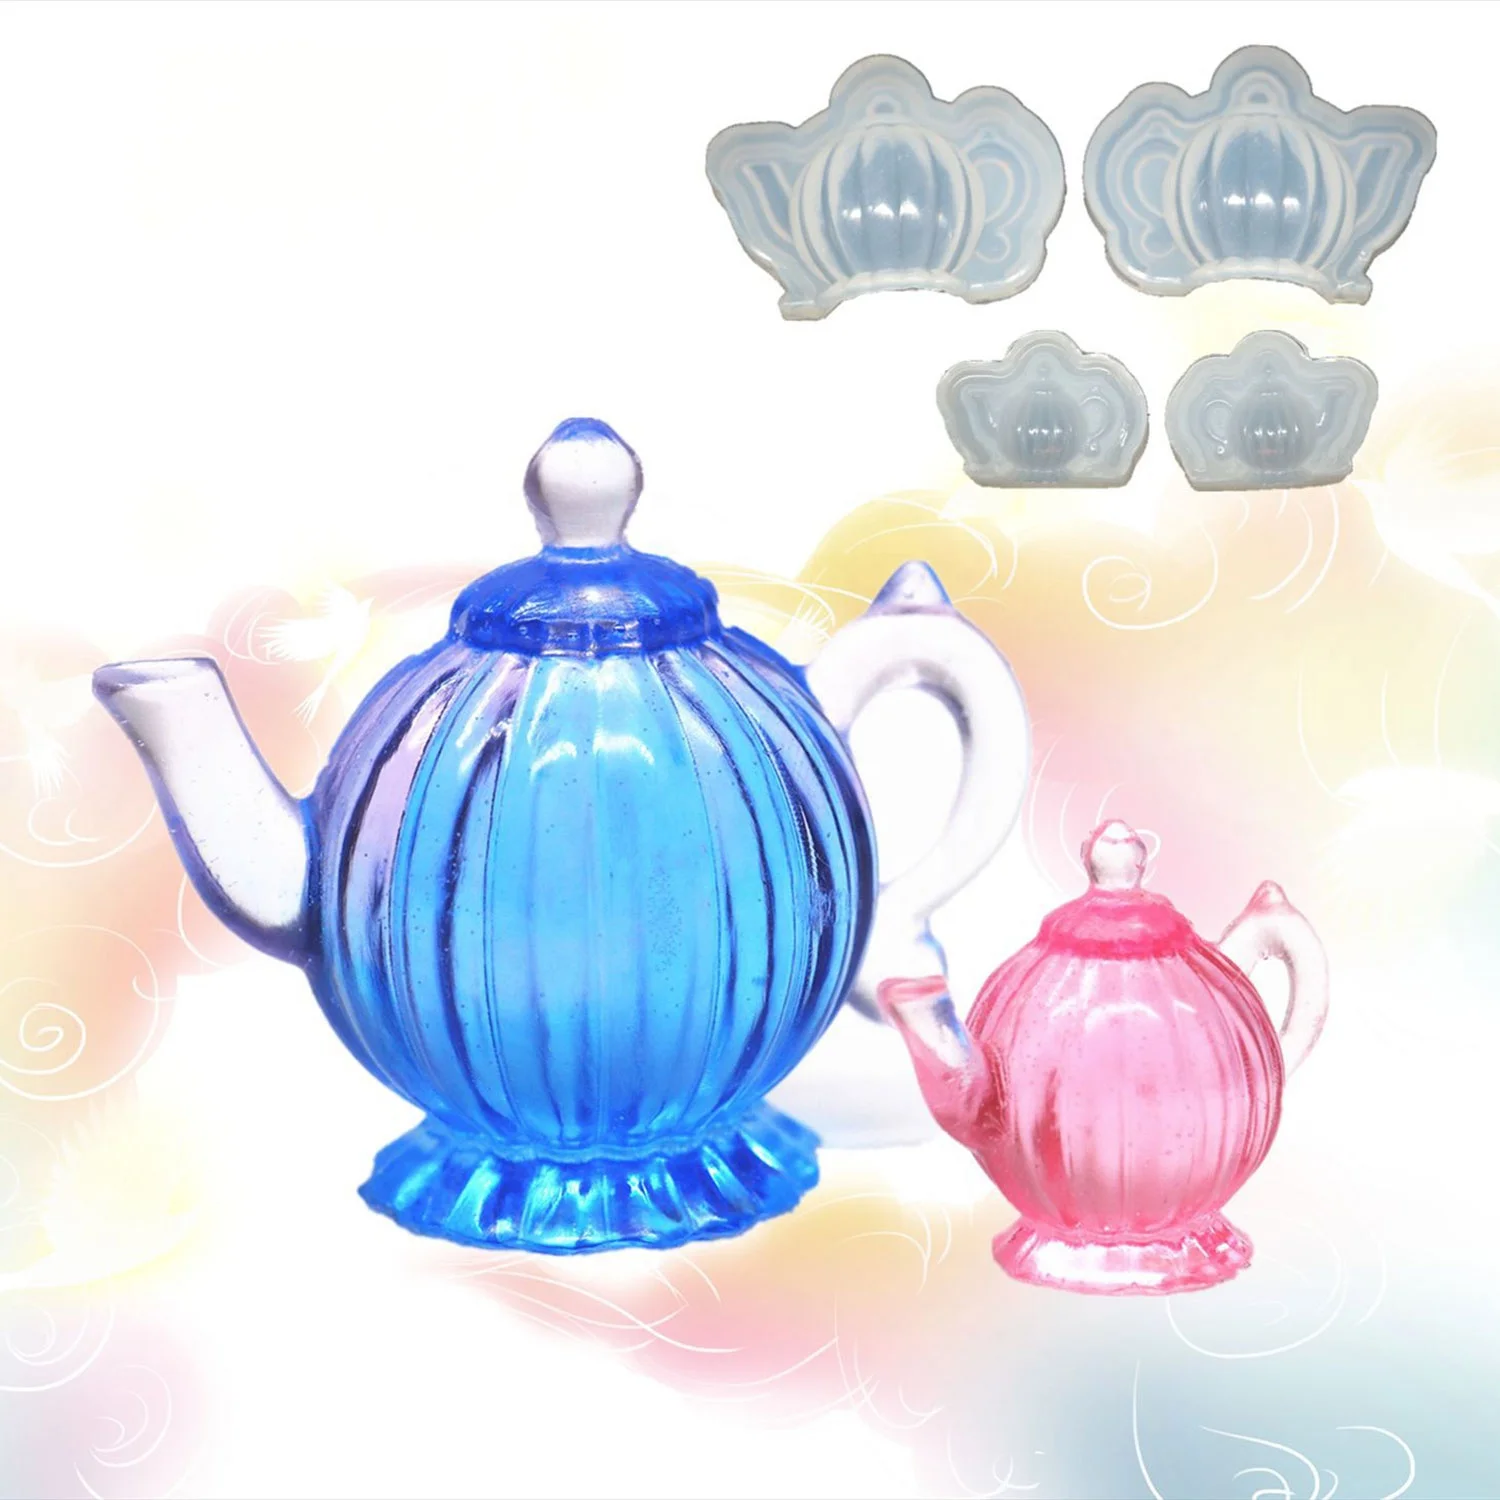 3D MINIATURE TEAPOT SILICONE MOULD FOR CAKE TOPPERS CHOCOLATE CLAY ETC